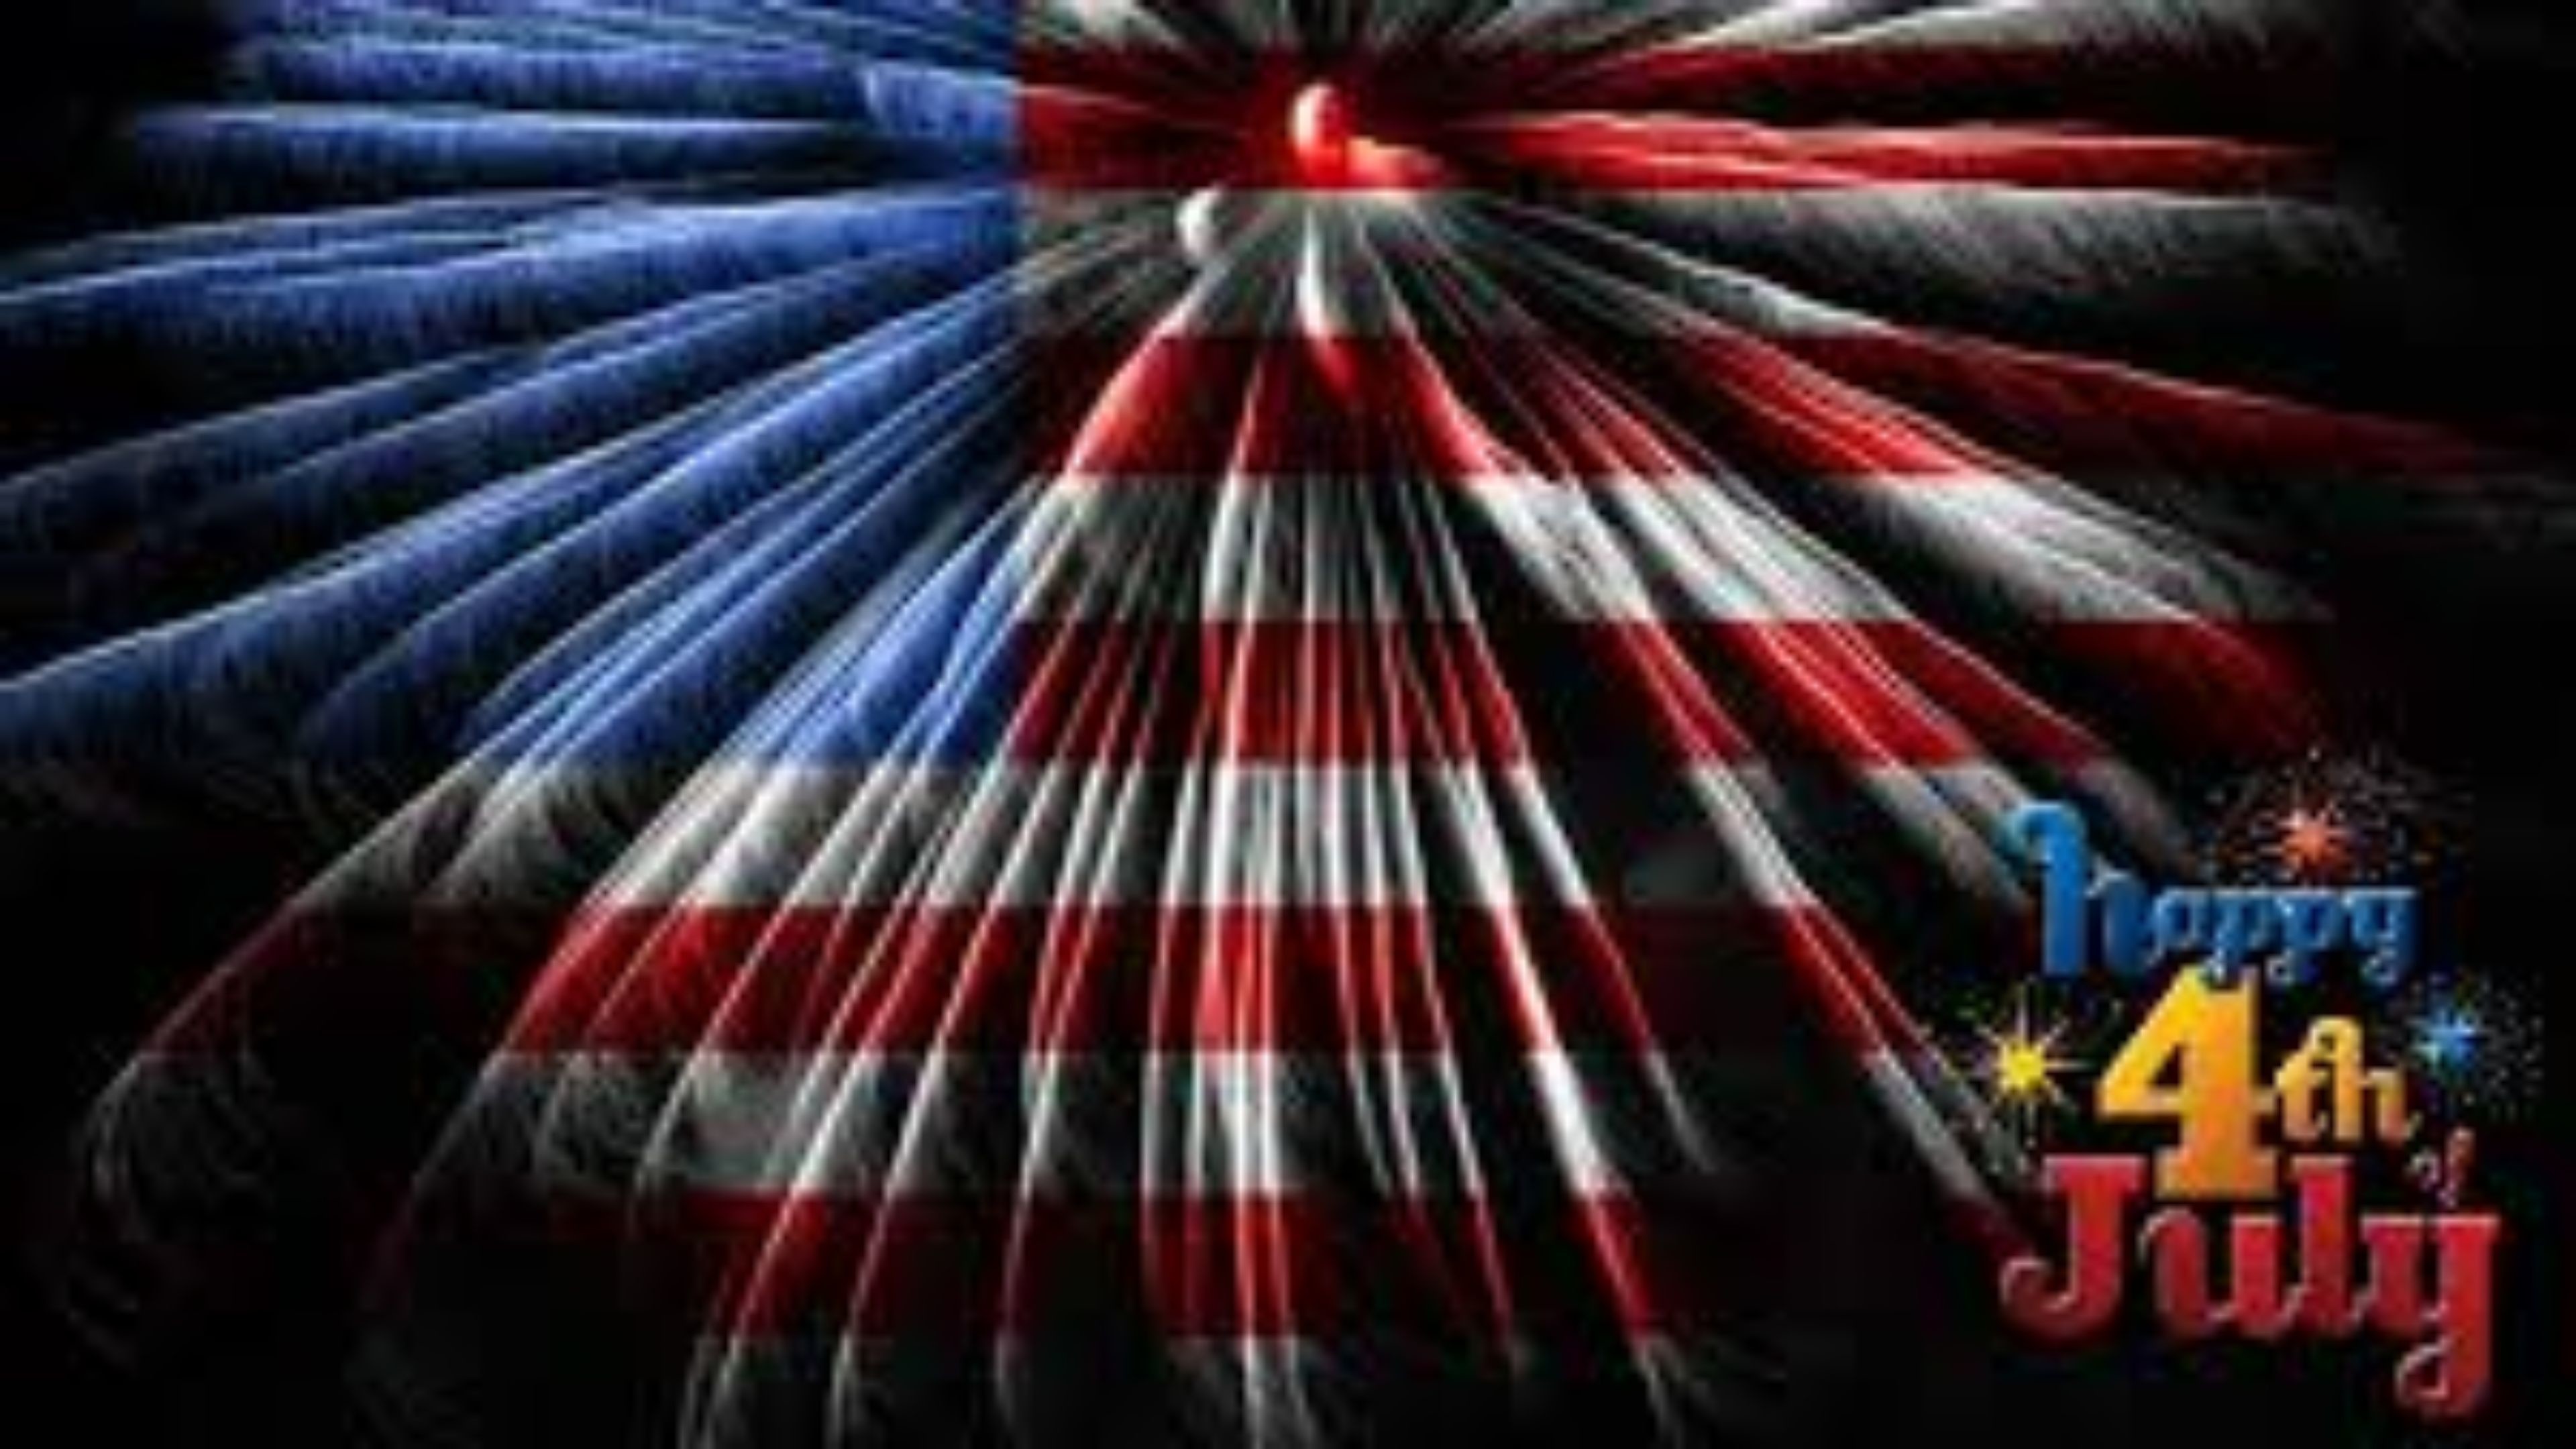 4th of july wallpaper by ashvan410  Download on ZEDGE  be55